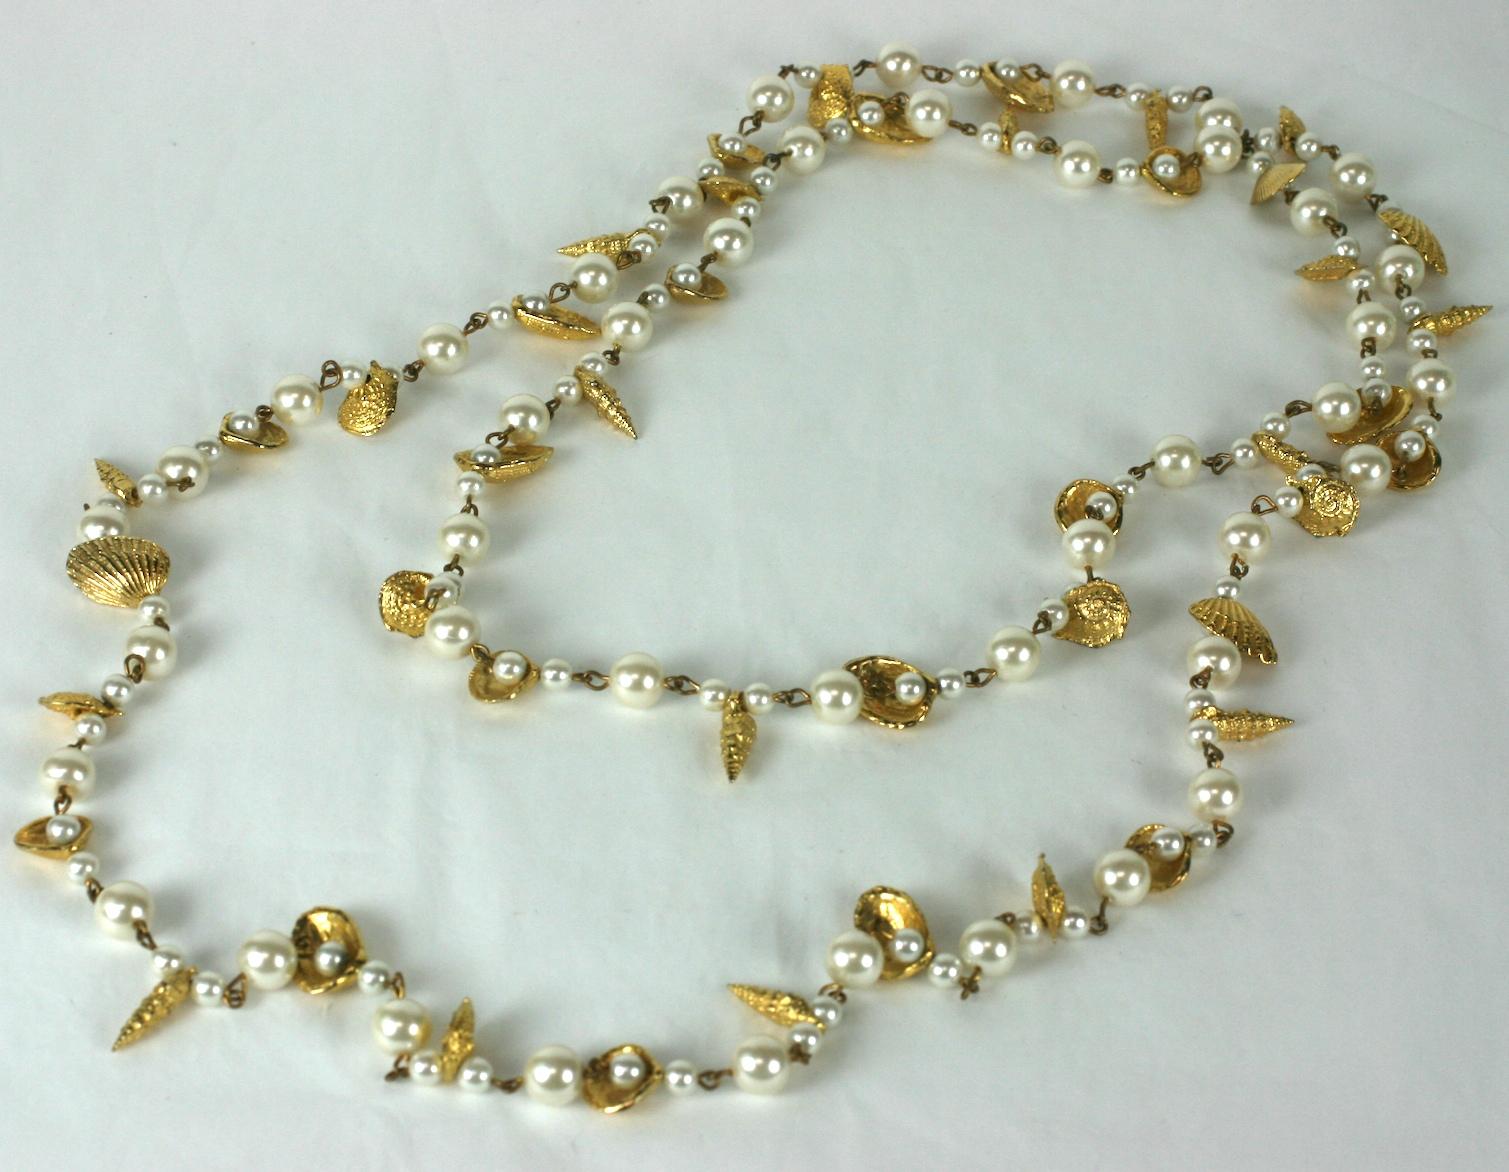 Gilt Shell and Faux Pearl Lariat, super long in length to layer and wrap as needed. Different gilded shells are dispersed though out this faux pearl necklace.
1980's USA. 
60